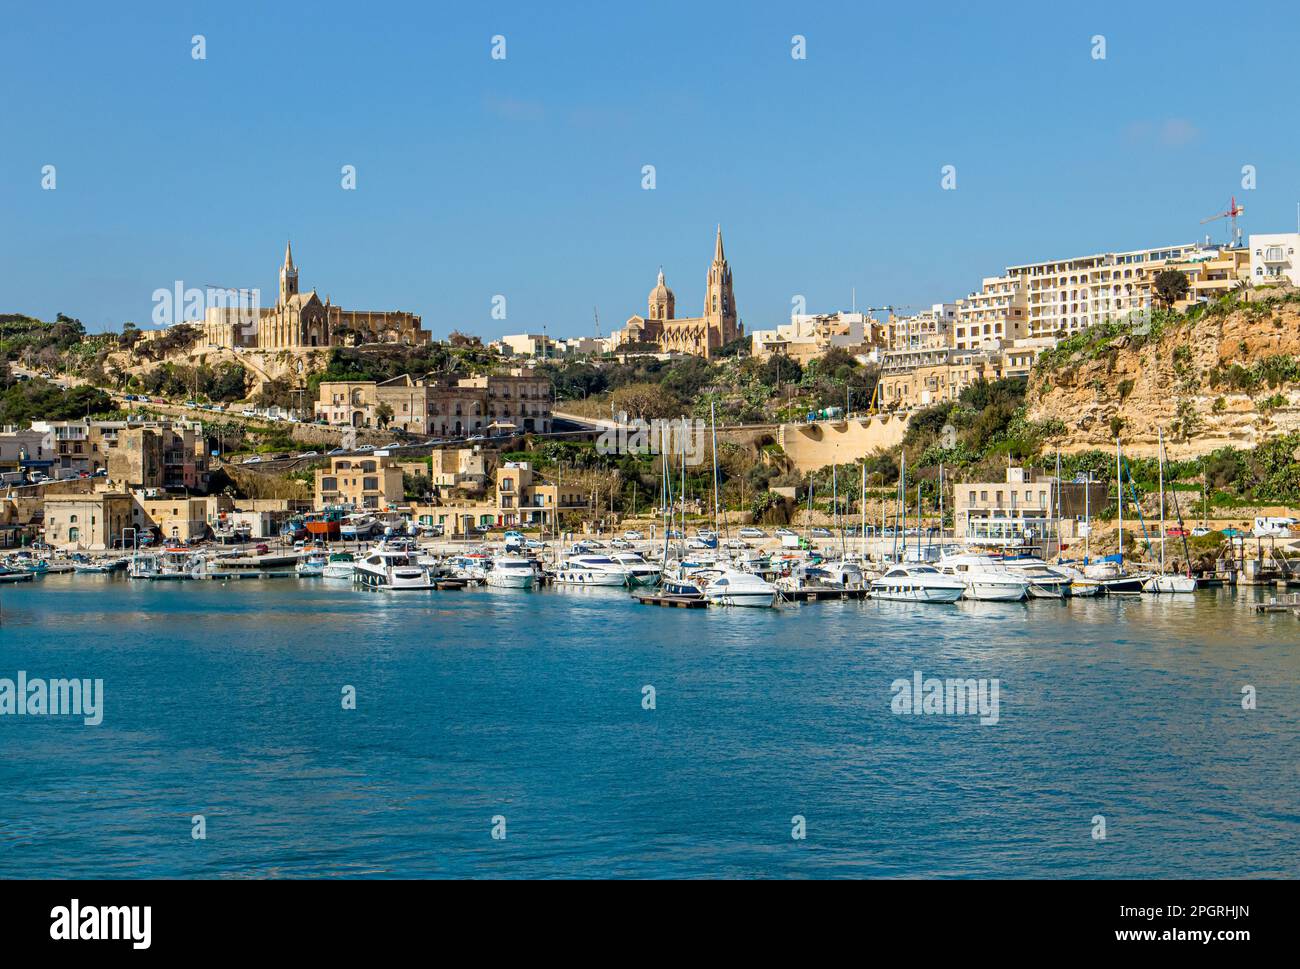 The port of Mġarr on the island of Gozo, Malta. Beautiful city on the cliffs and hills on the background on sunny spring day. Stock Photo